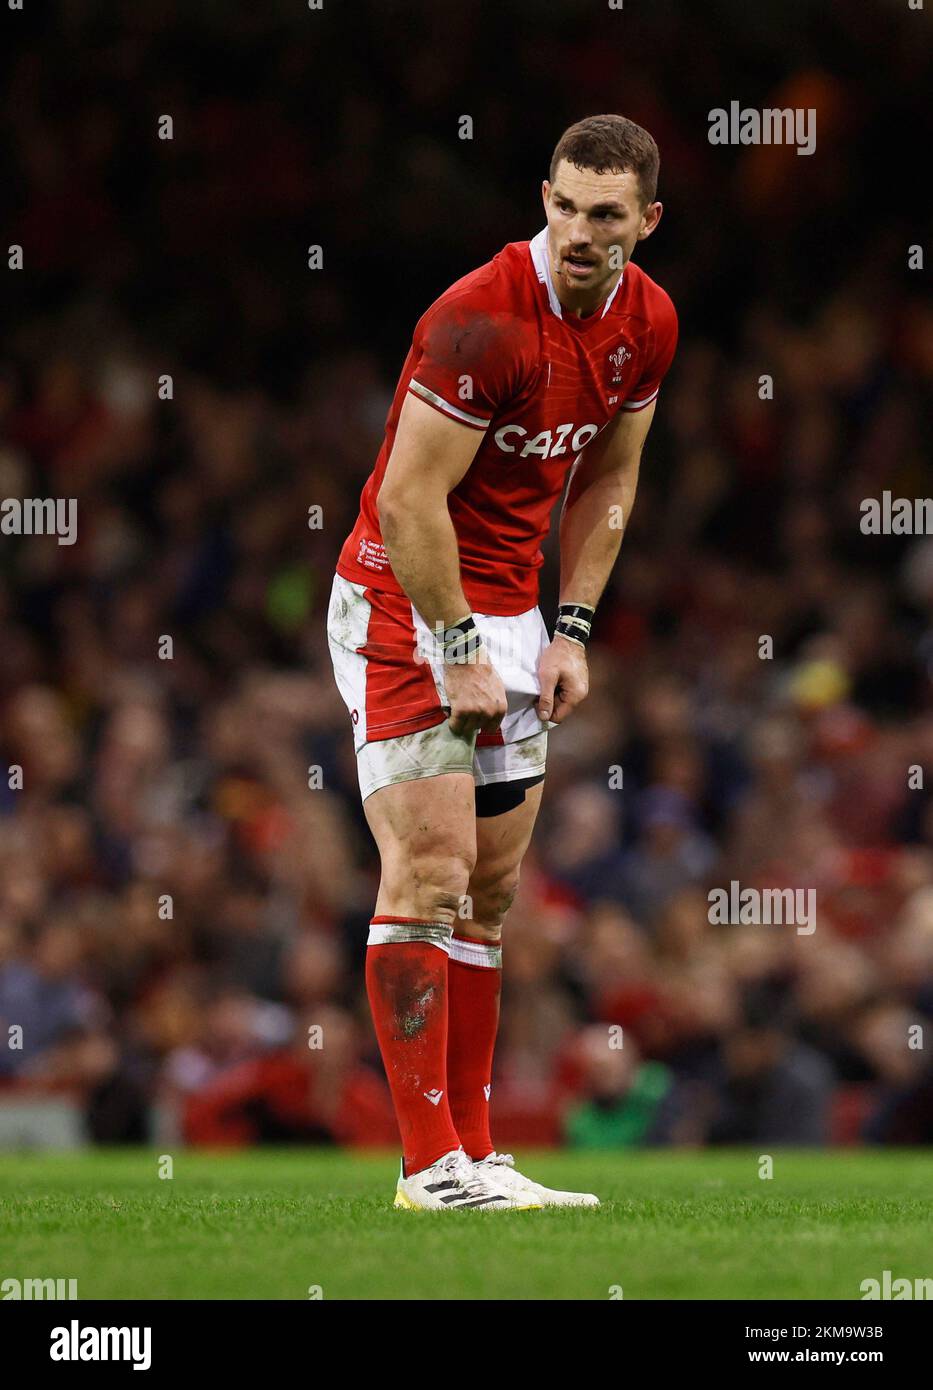 Rugby Union - International - Wales v Australia - Principality Stadium, Cardiff, Wales, Britain - November 26, 2022 Wales' George North reacts Action Images via Reuters/Andrew Couldridge Stock Photo